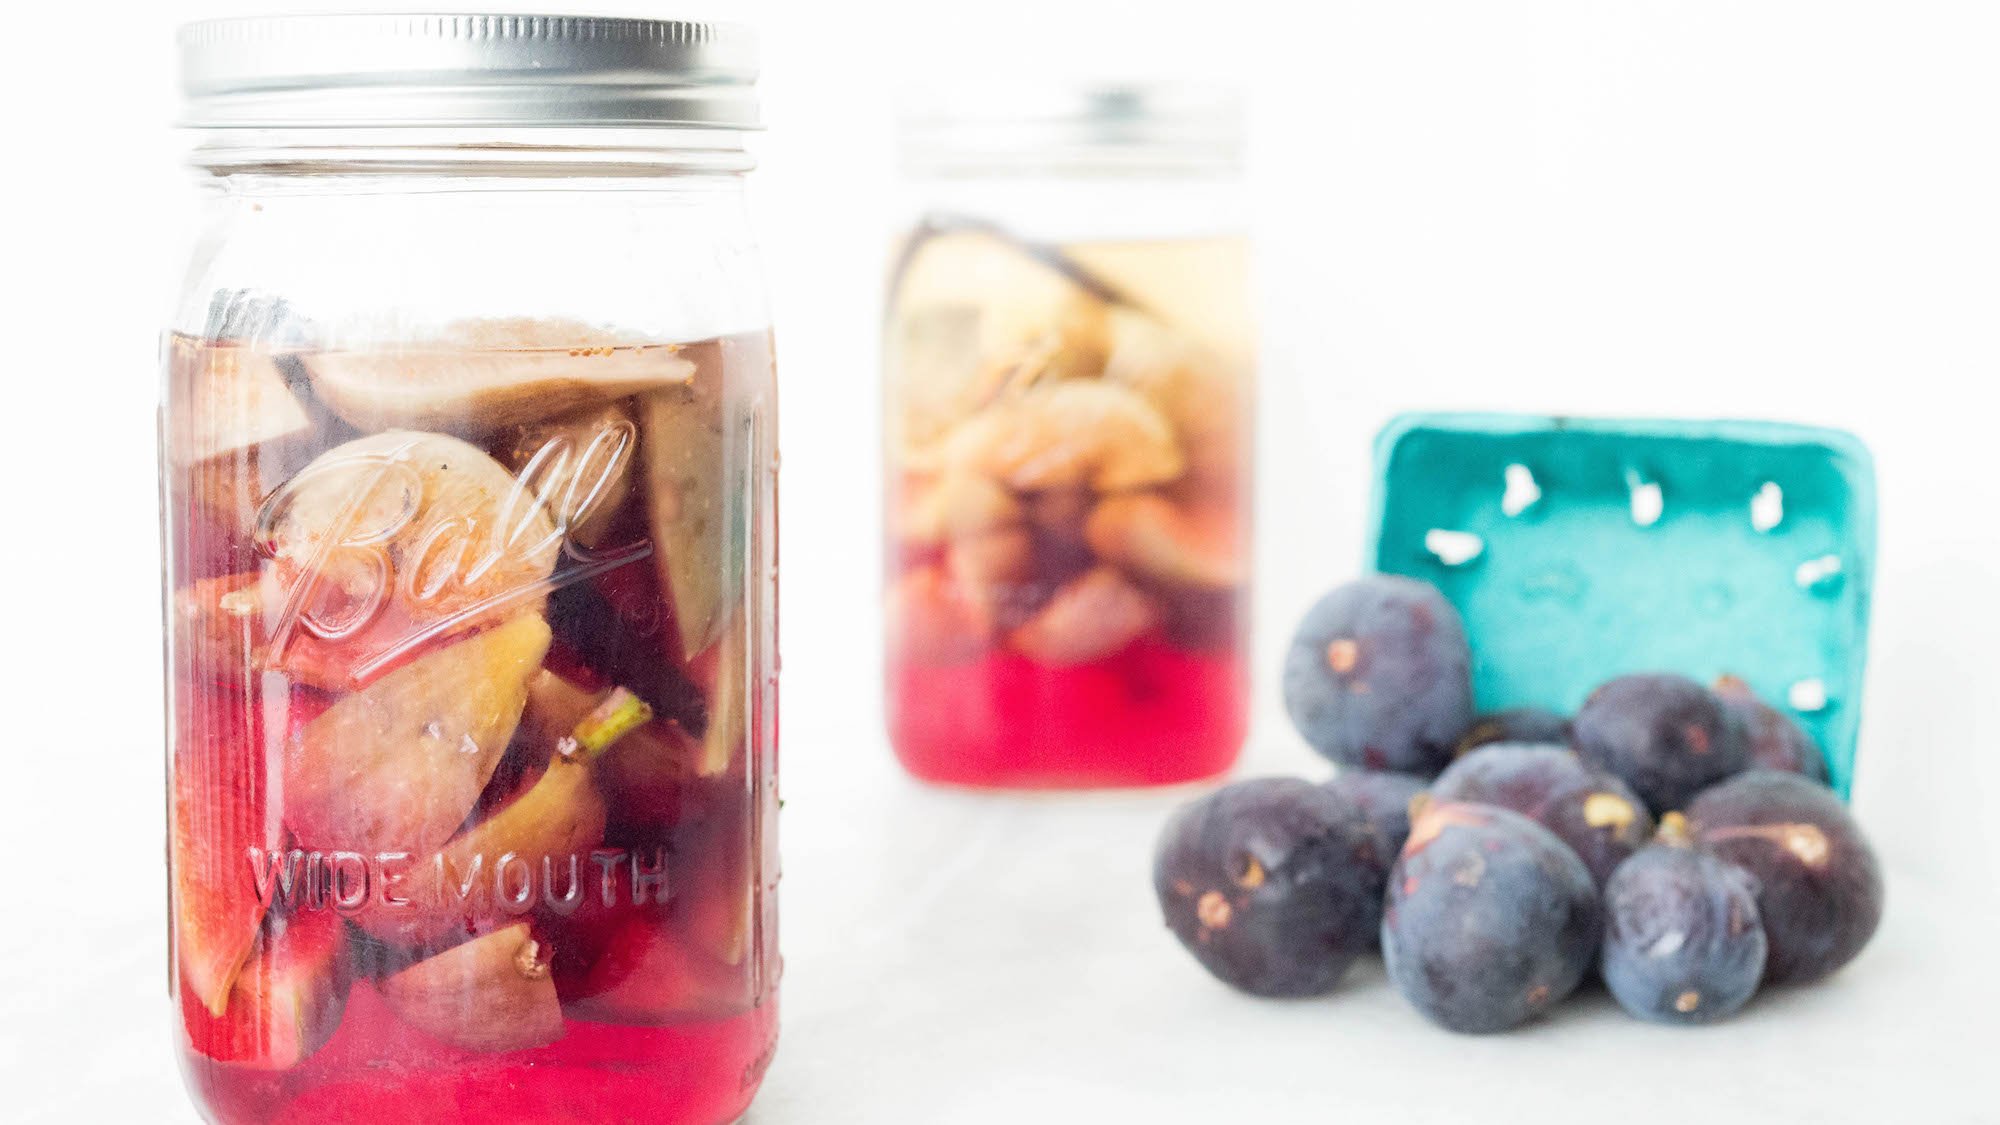 A large glass mason jar is filled with vodka that's turned pink from the sliced figs inside. Another jar is out of focus in the background along with a basket of fresh brown figs.